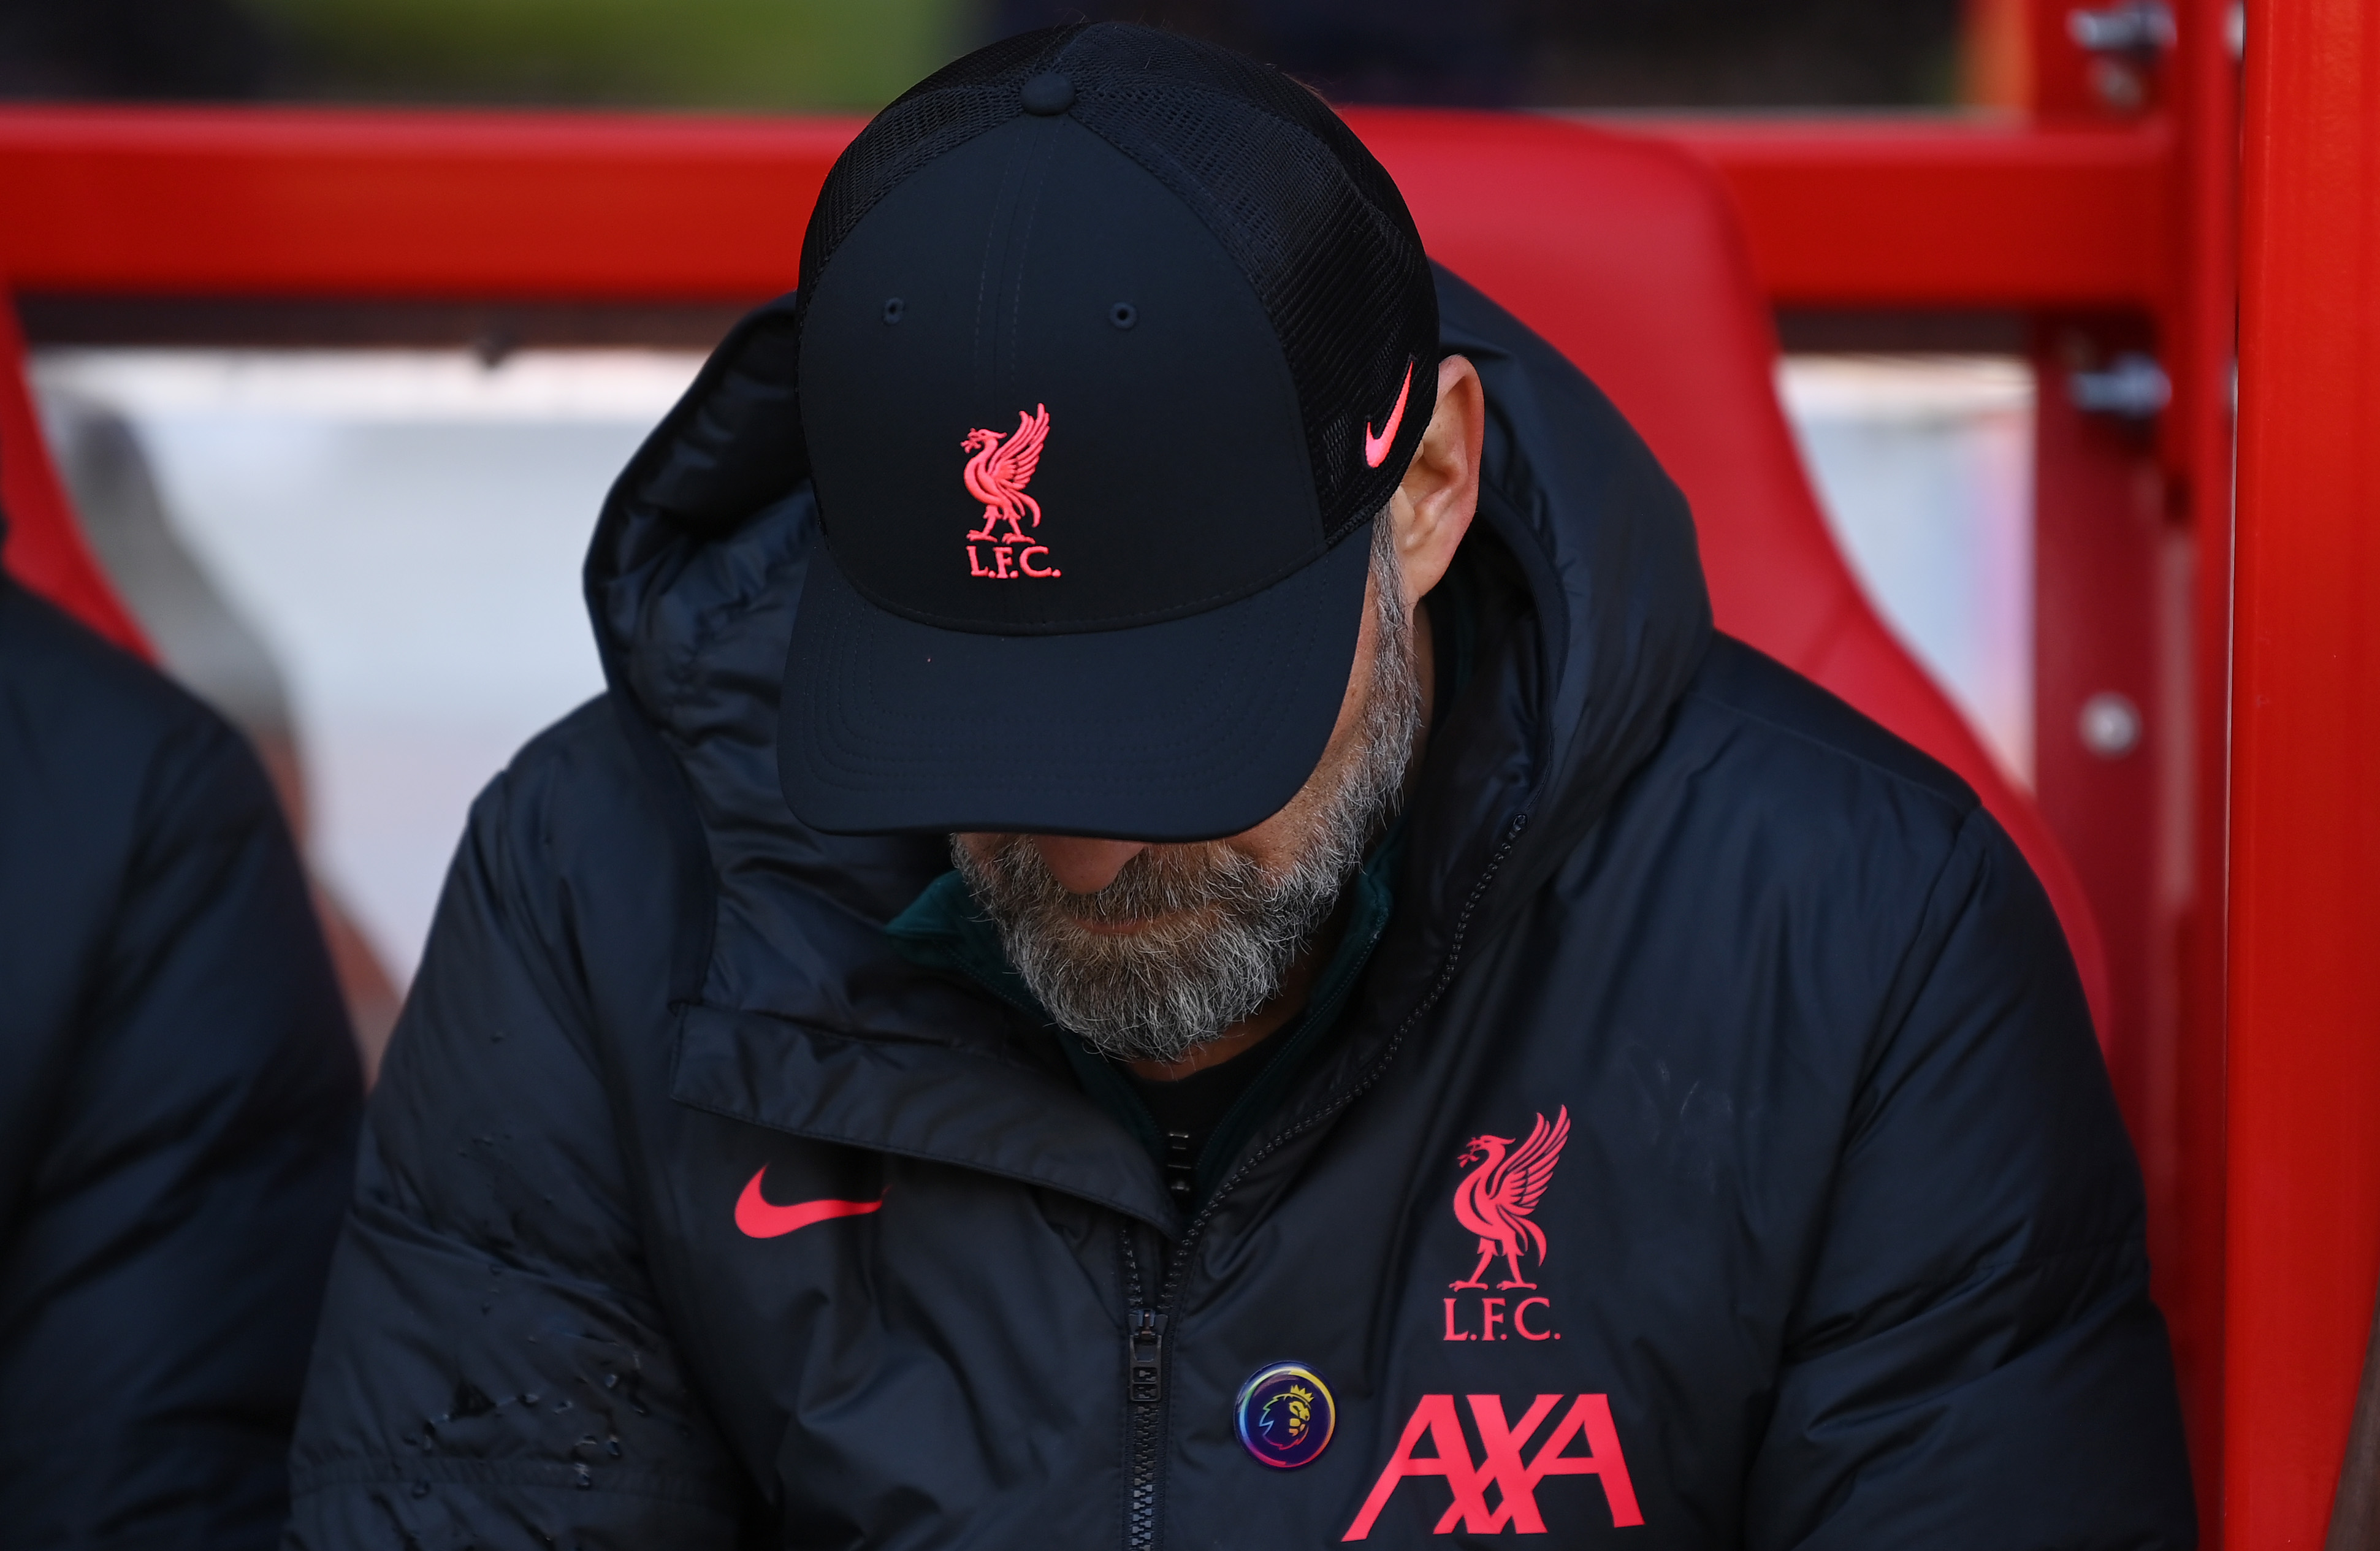 Two key Liverpool stars missing from training ahead of Ajax visit